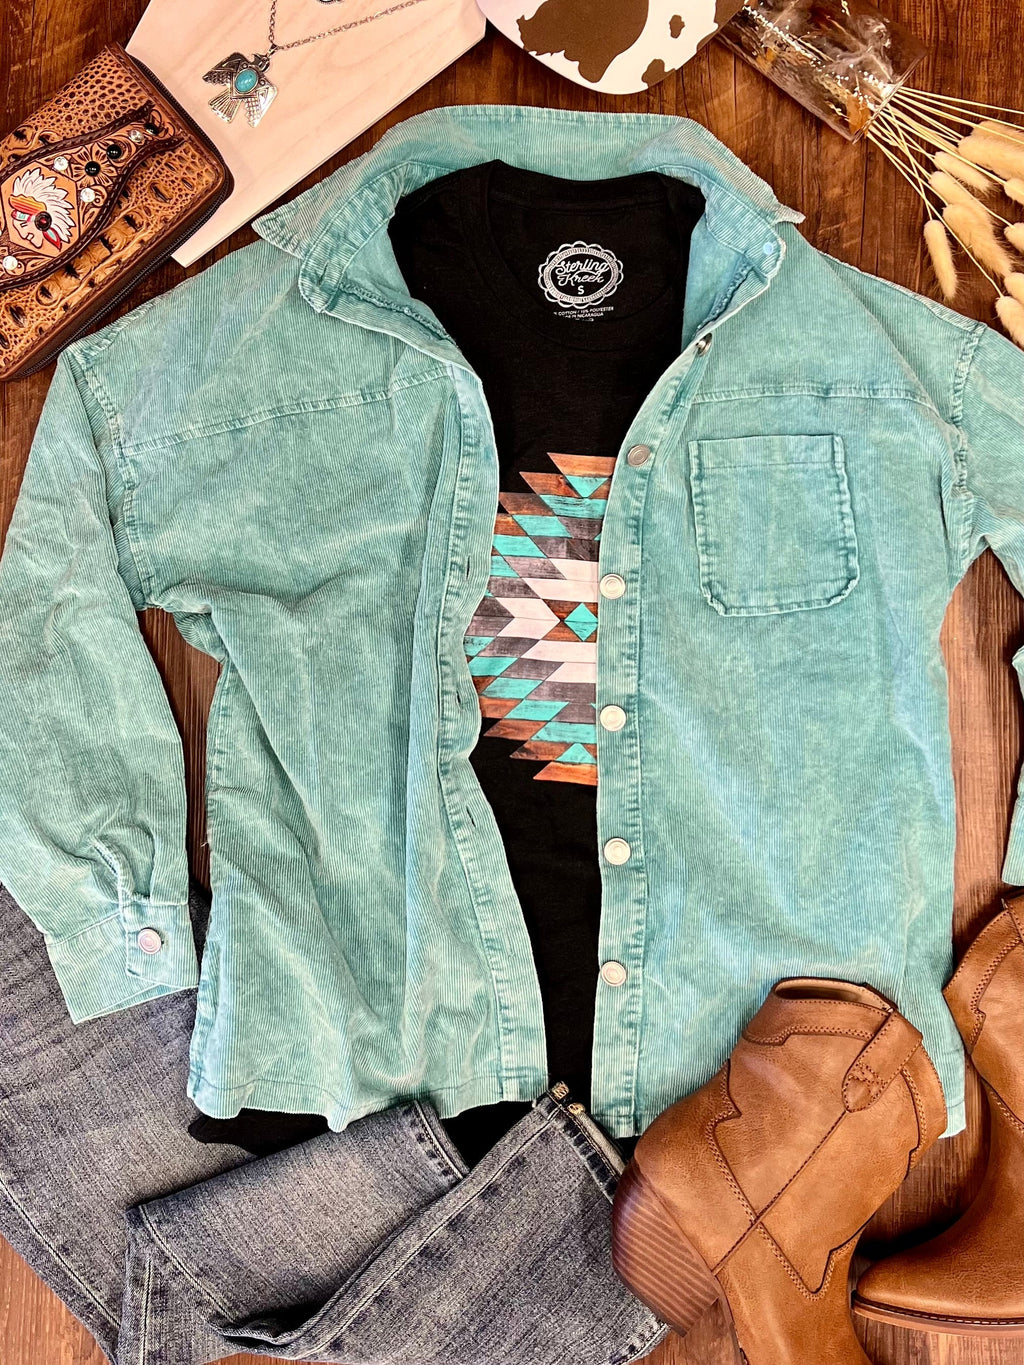 This Teal Acid Wash Corduroy Shacket is perfect for days when you just can't decide! It's the perfect mix of oversized style with a hi-low hem and long sleeve cut, making it oh-so-versatile. The acid-washed teal hue adds a side of chill, while front button closure keeps it fresh and flirty. Throw it on and go!  100% Polyester